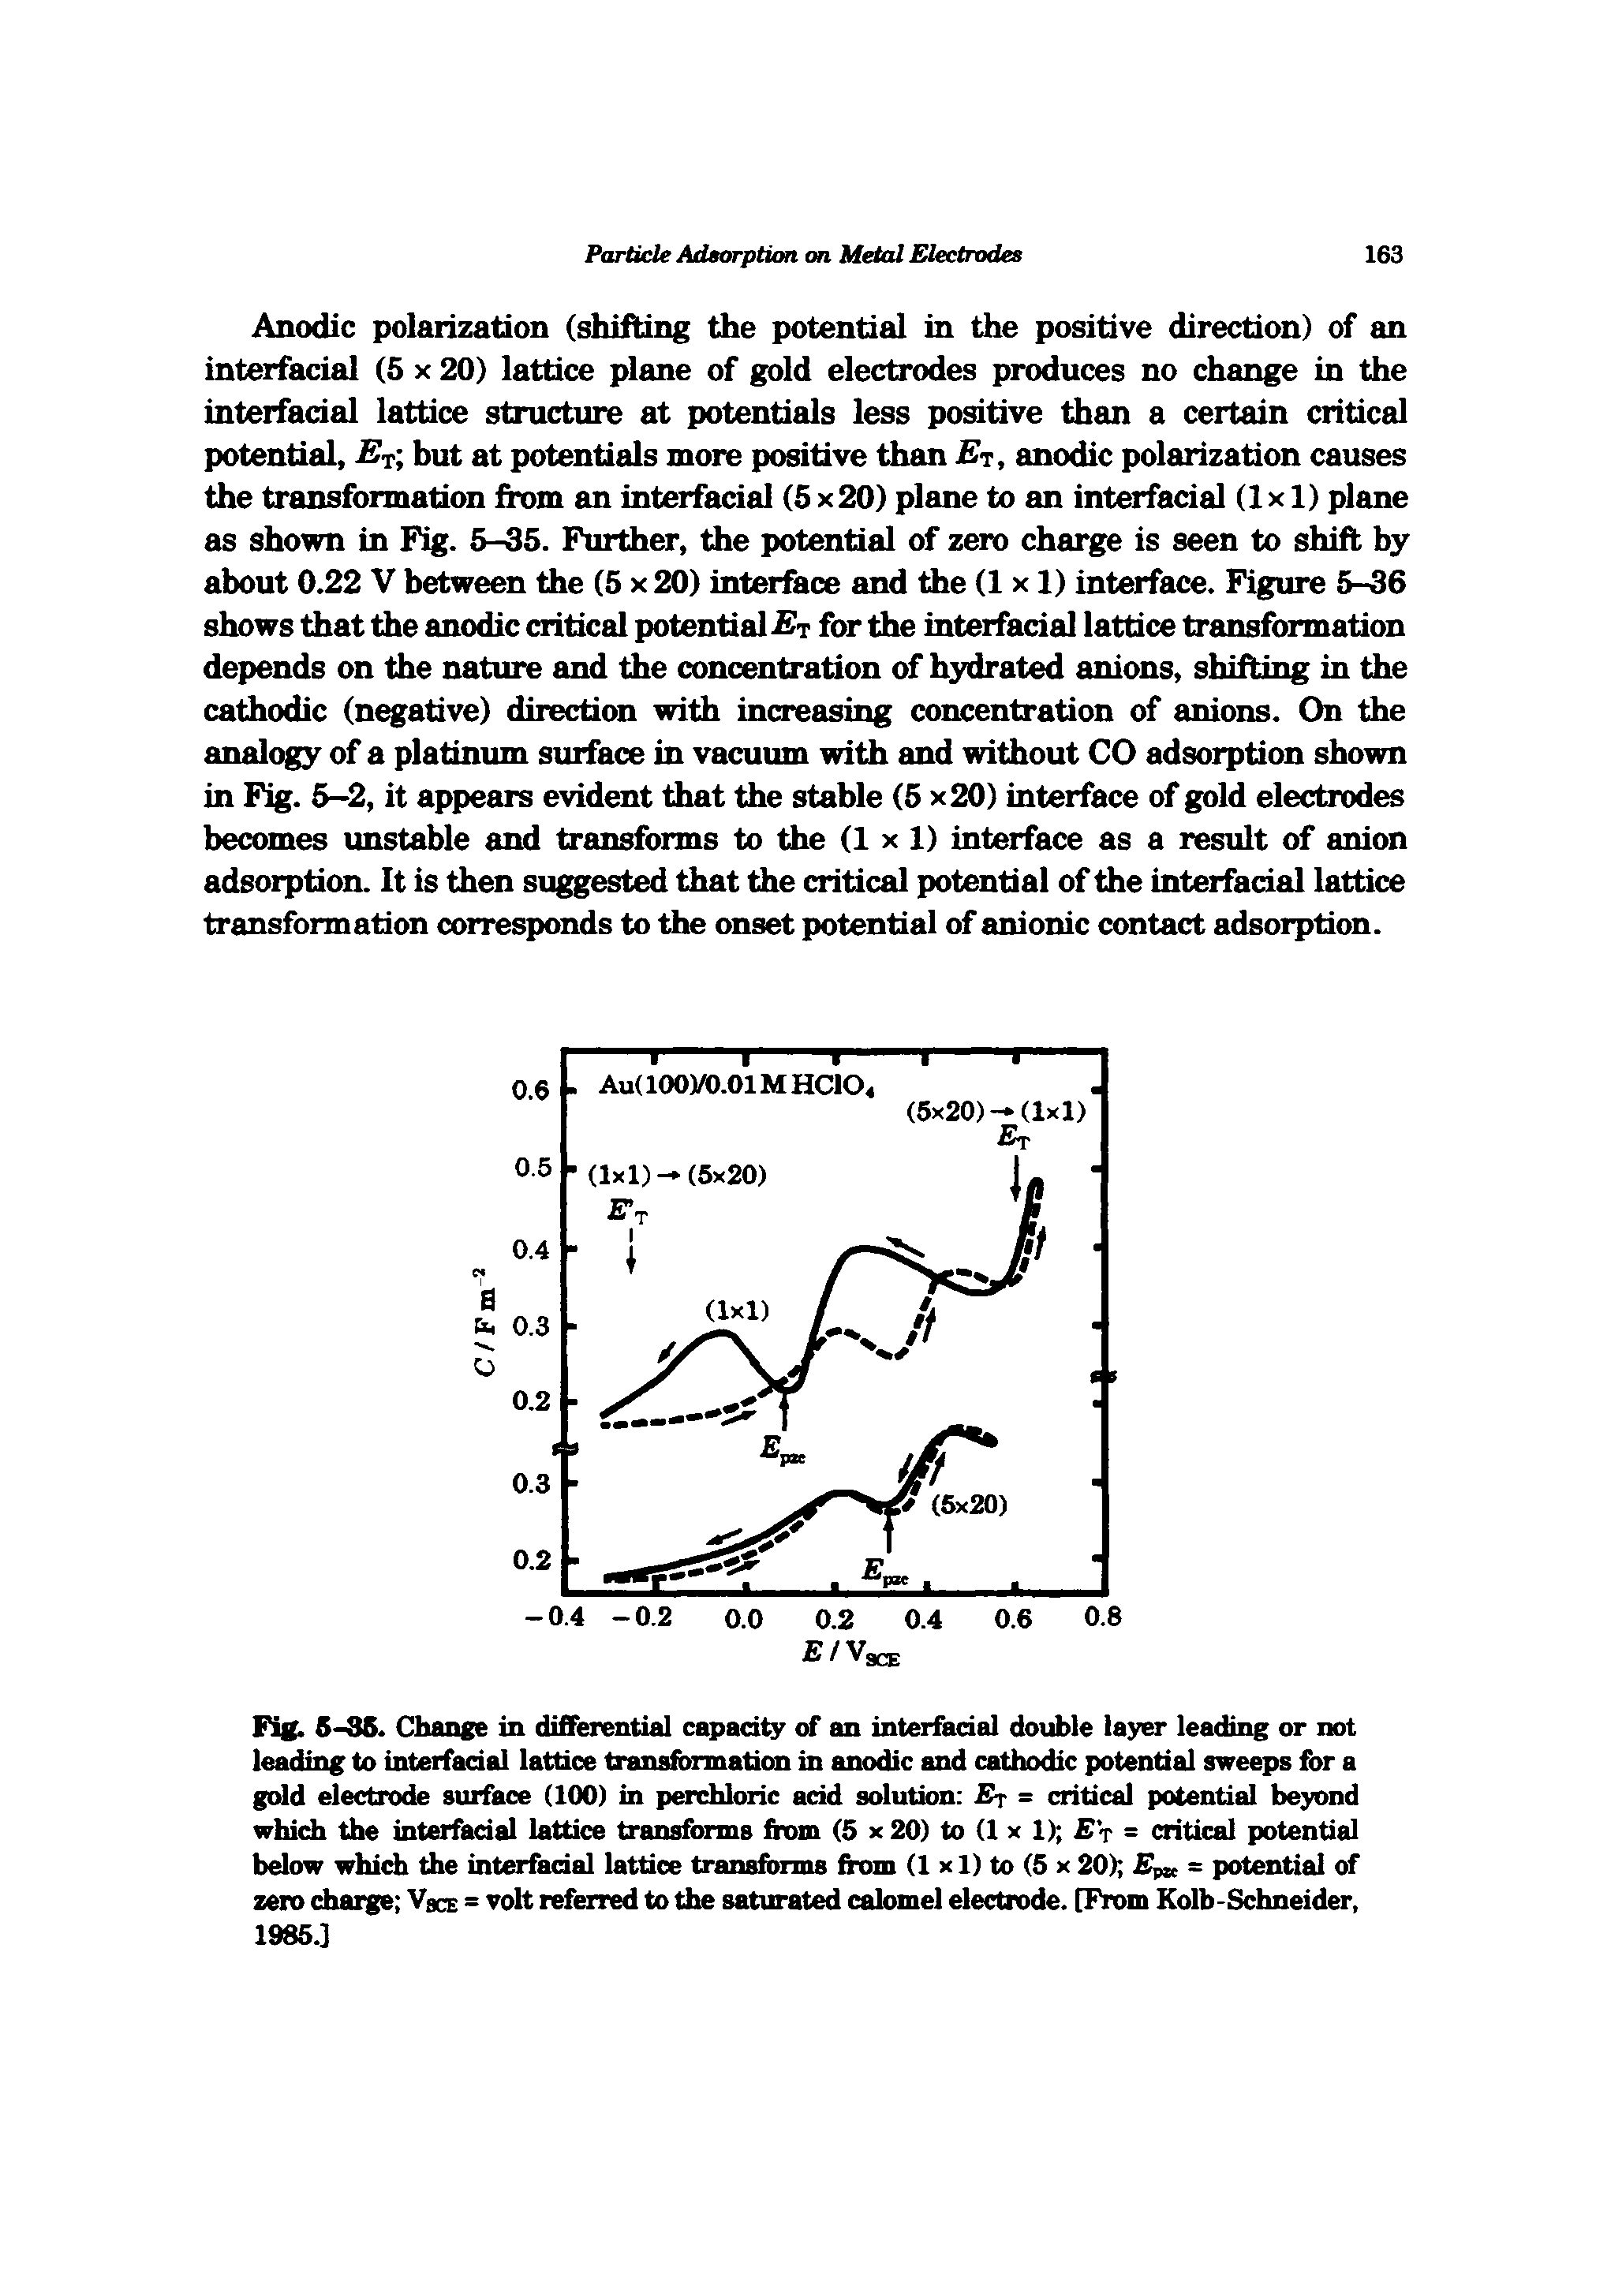 Fig. 6-96. Change in differential capacity of an interfadal double layer leading or not leading to interfadal lattice transformation in anodic and cathodic potential sweeps for a gold electrode surface (100) in perchloric add solution Ey = critical potential beyond which the interfadal lattice transforms from (5 x 20) to (1 x 1) E = critical potential below which the interfadal lattice transforms from (1 x 1) to (5 x 20) Ejm = potential of zero charge VacE = volt referred to the saturated calomel electrode. [From Kolb-Schneider, 1985.]...